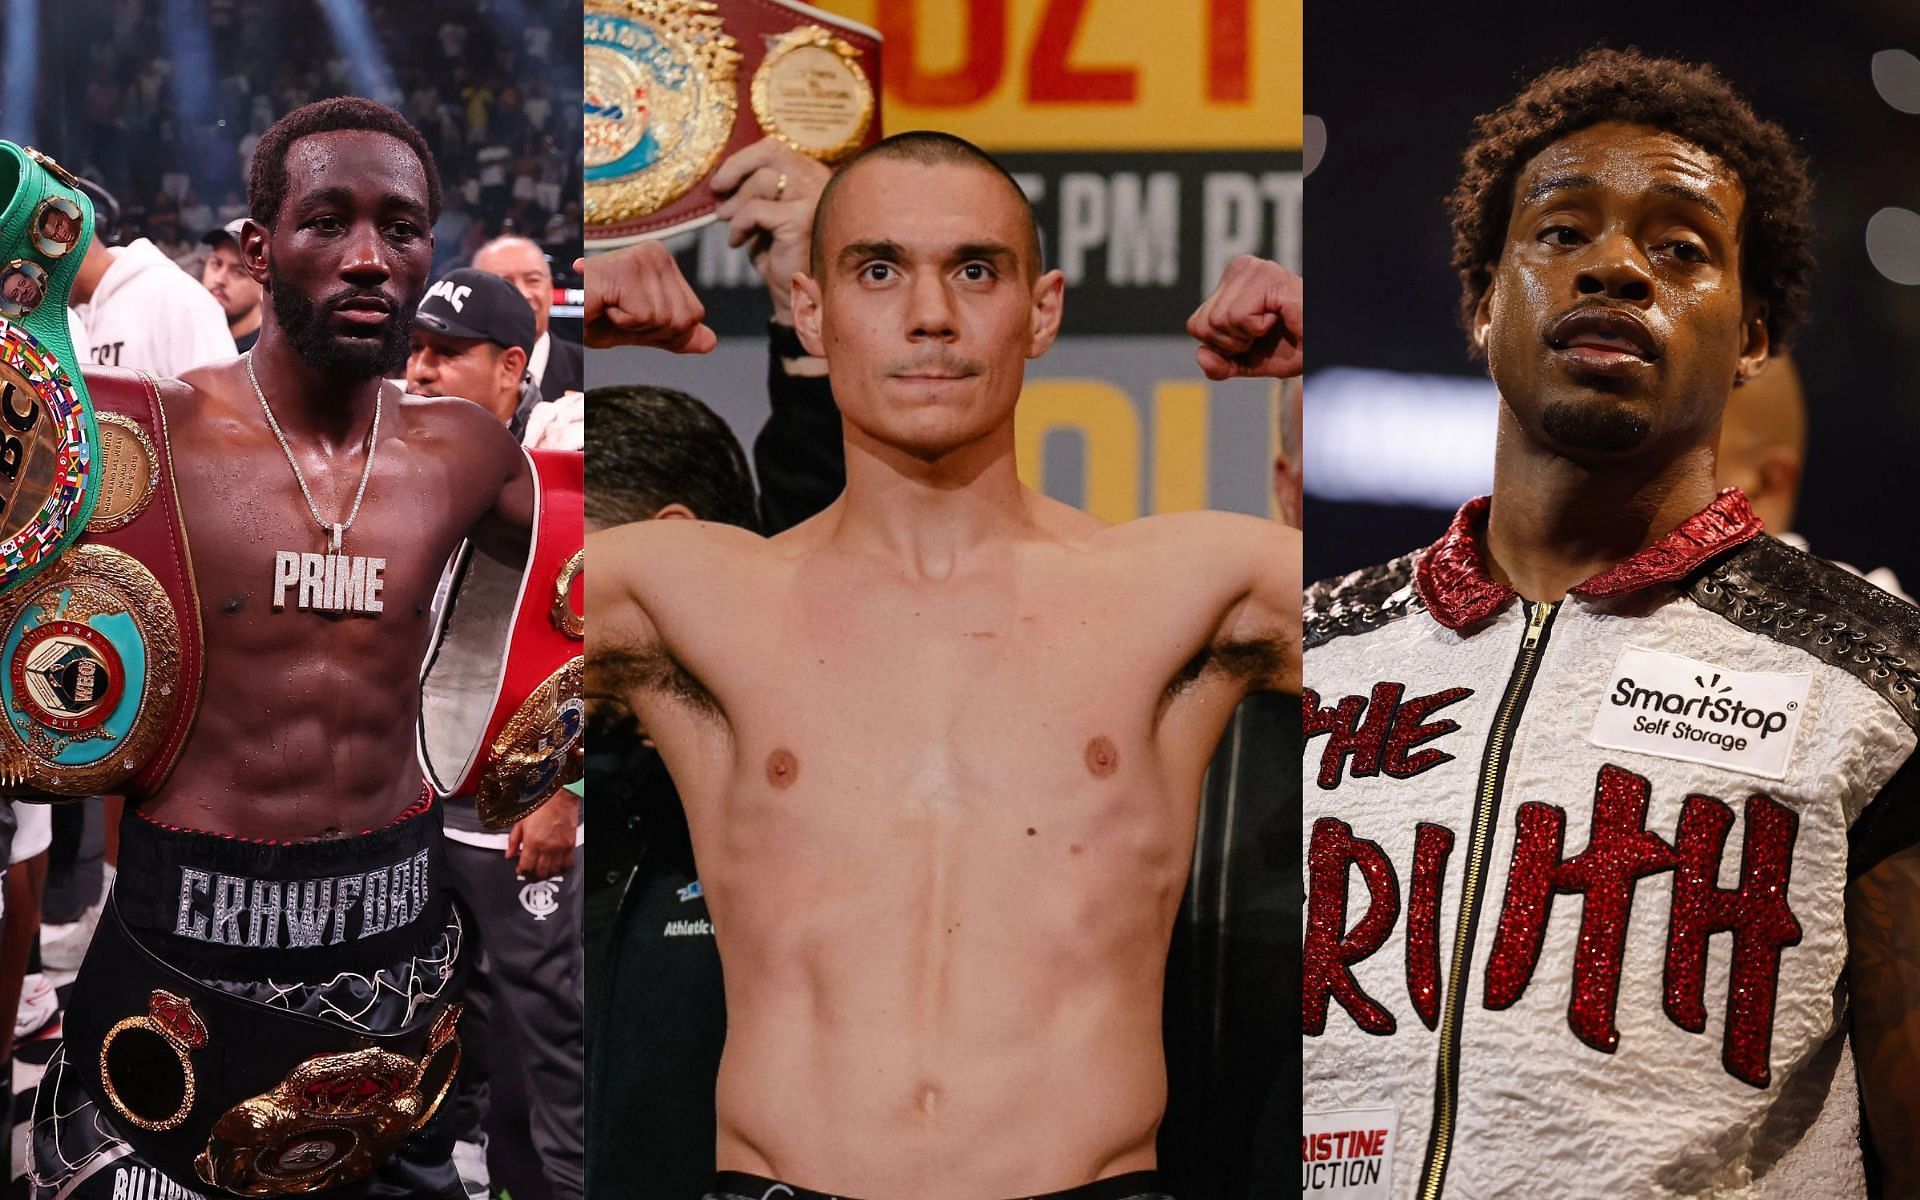 Terence Crawford (left) will not face Tim Tszyu (middle) before Errol Spence Jr. (right) does [Images Courtesy: @GettyImages, @timtszyu on Instagram]